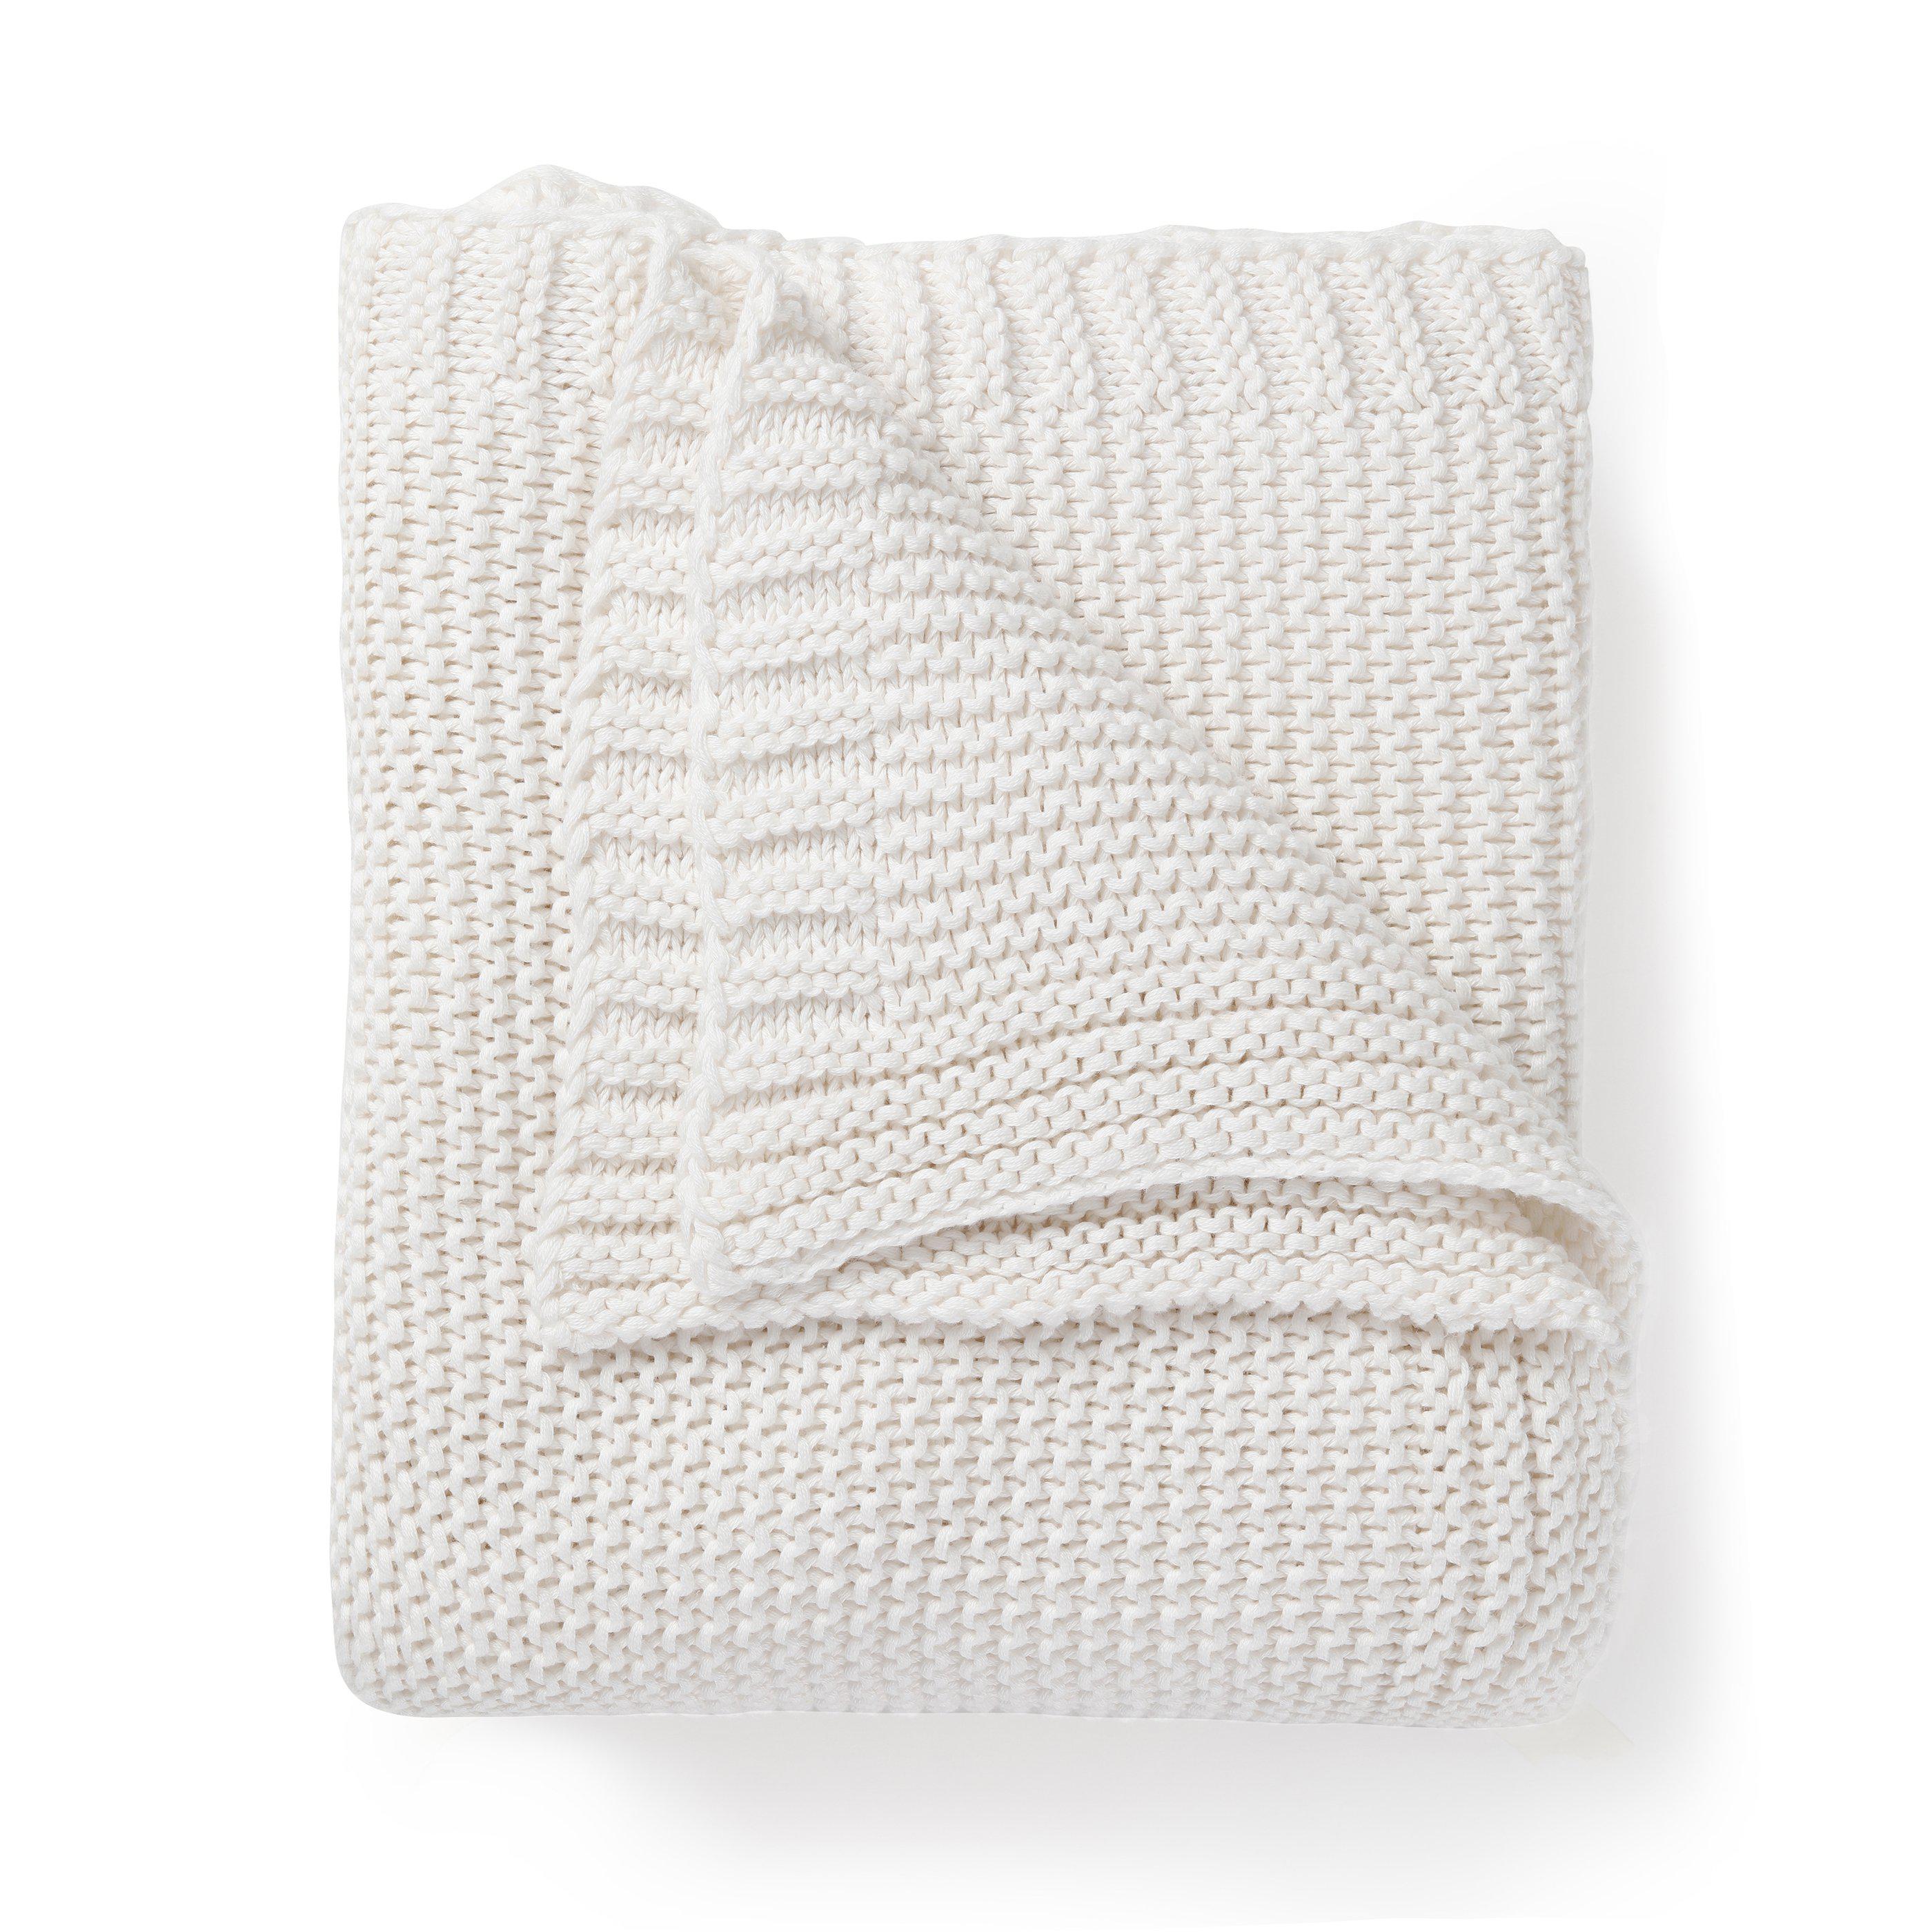 A neatly folded Chunky Knit Throw Blanket - Ella Ivory from Makemake Organics, with a ribbed texture, displayed against a white background for a clean and simplistic look.